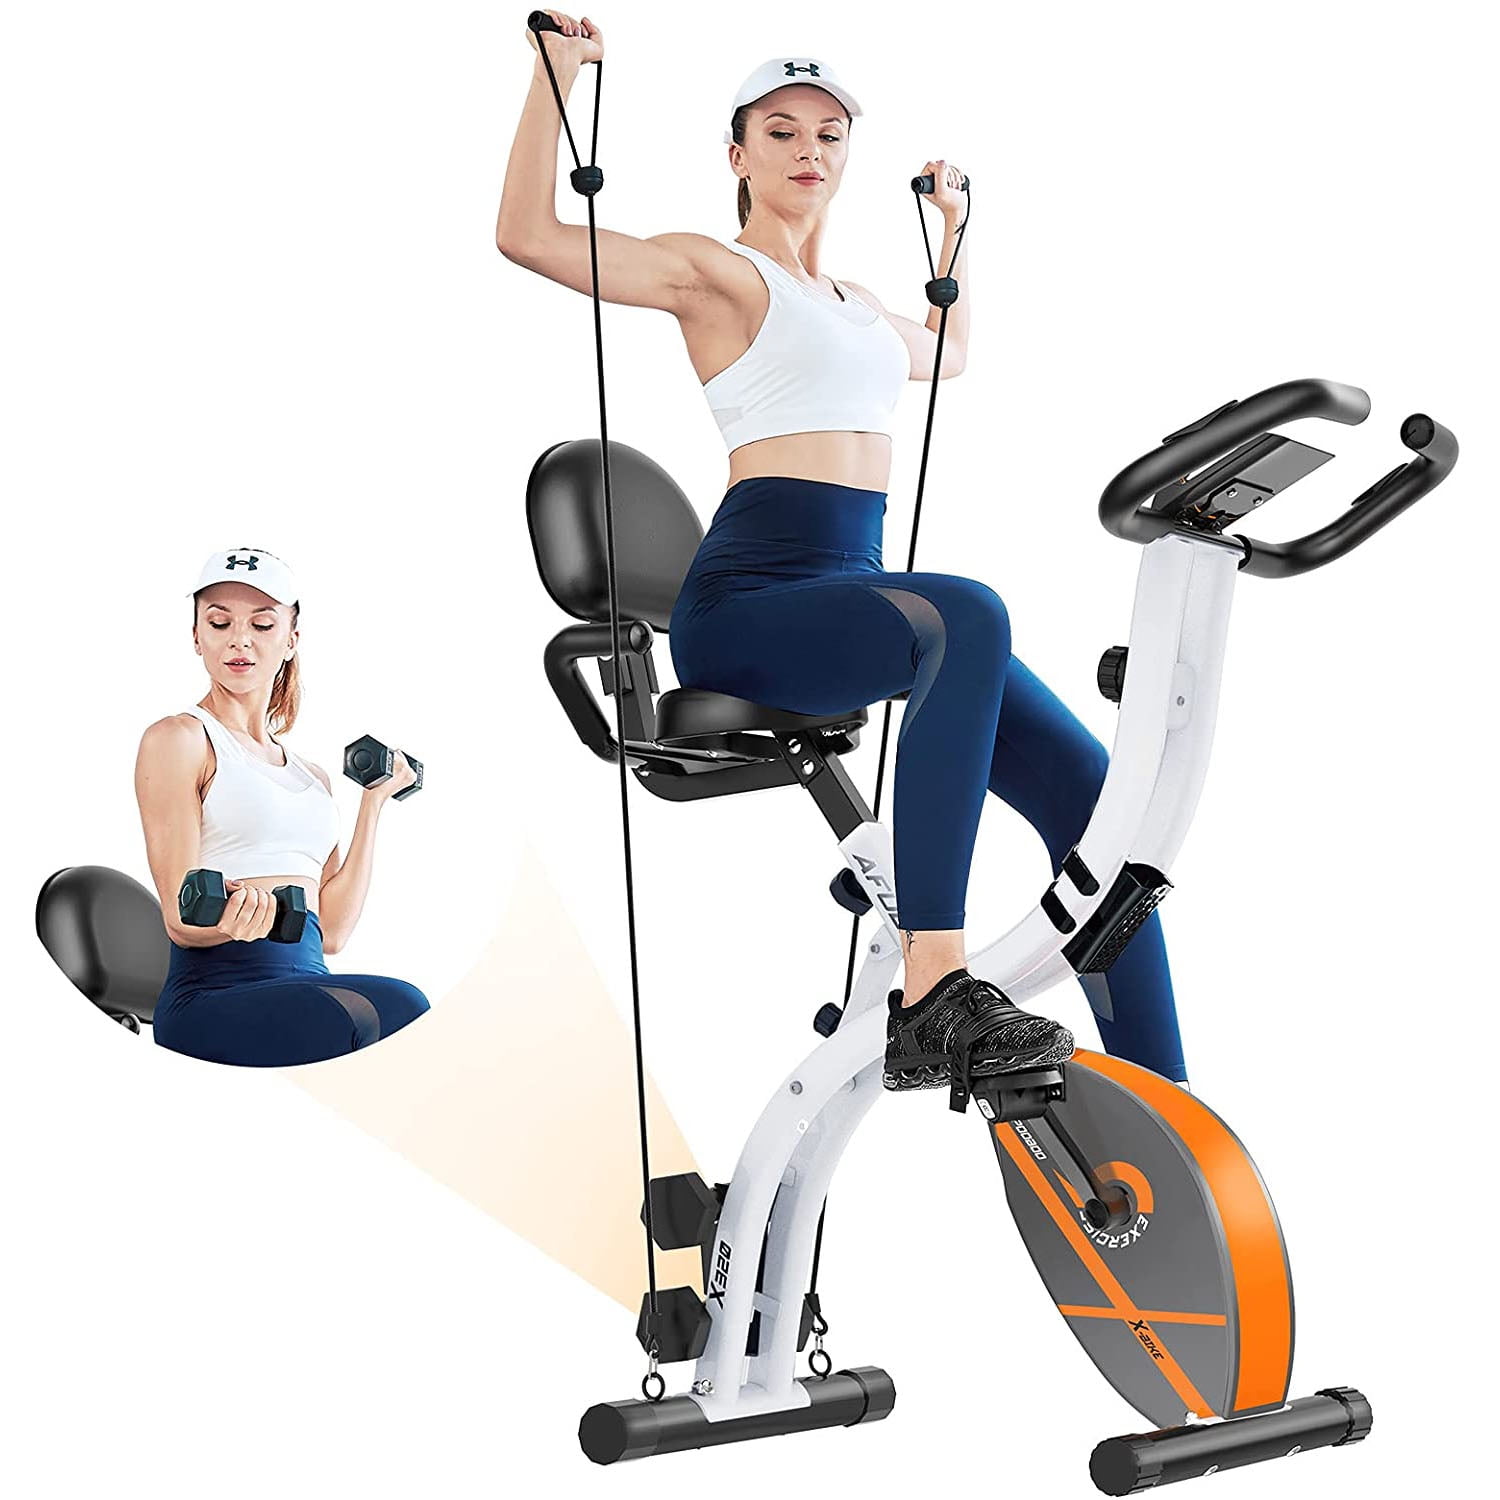 POOBOO 3-in-1 Folding Stationary Upright Exercise Bike Machine Home 300 Lbs Adjustable Arm Resistance Bands